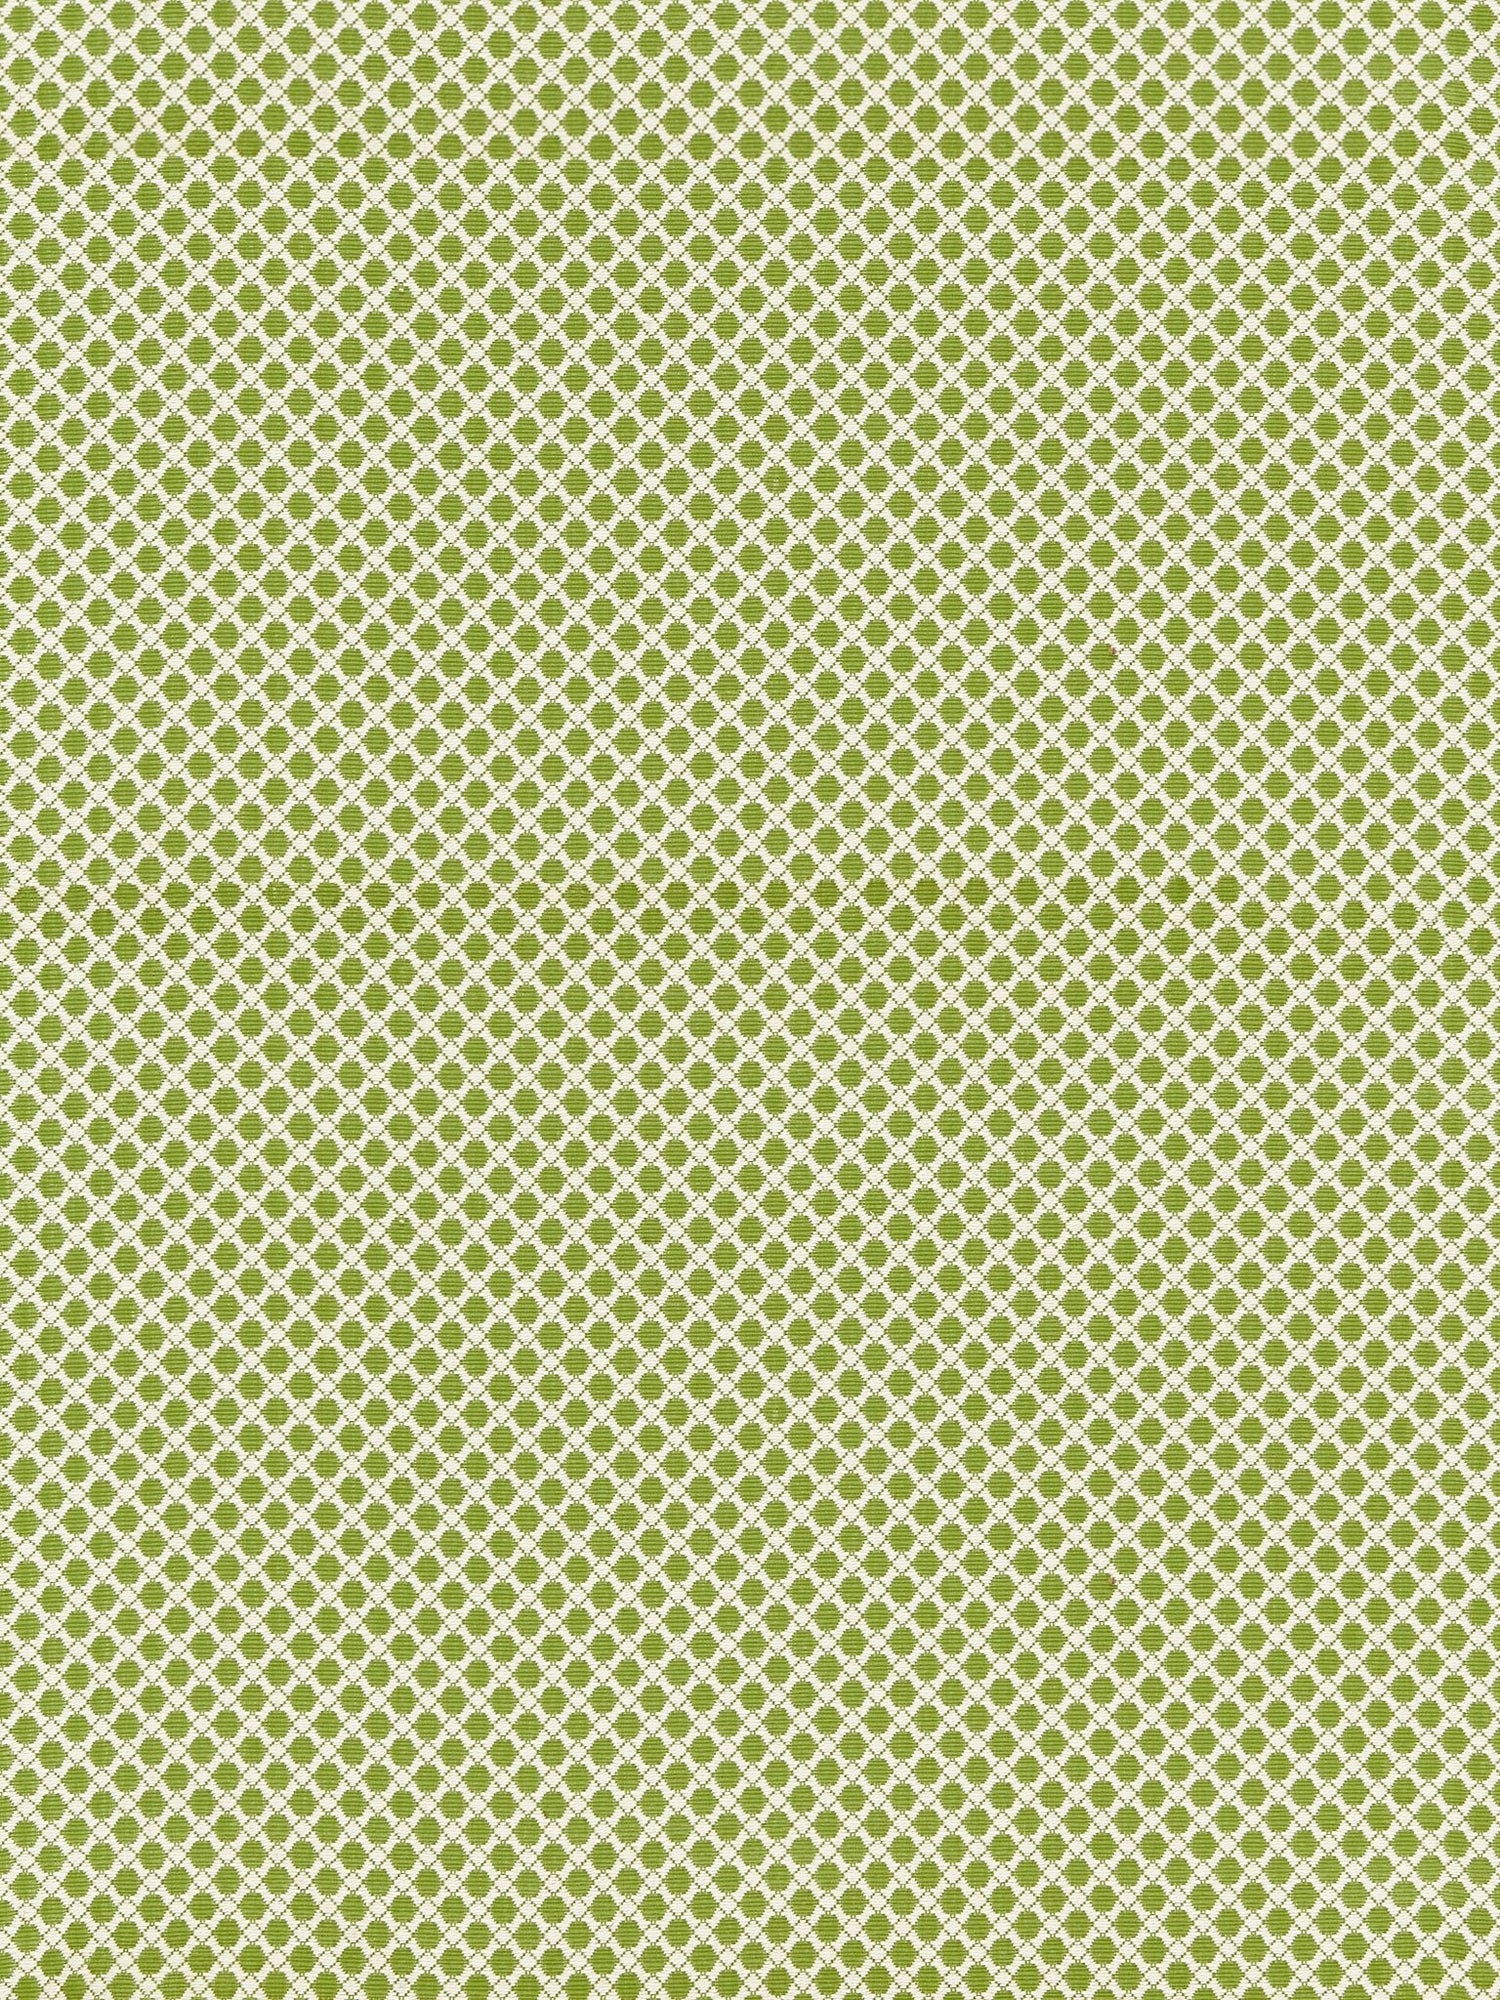 Bellaire Trellis fabric in leaf color - pattern number BK 0003K65121 - by Scalamandre in the Old World Weavers collection